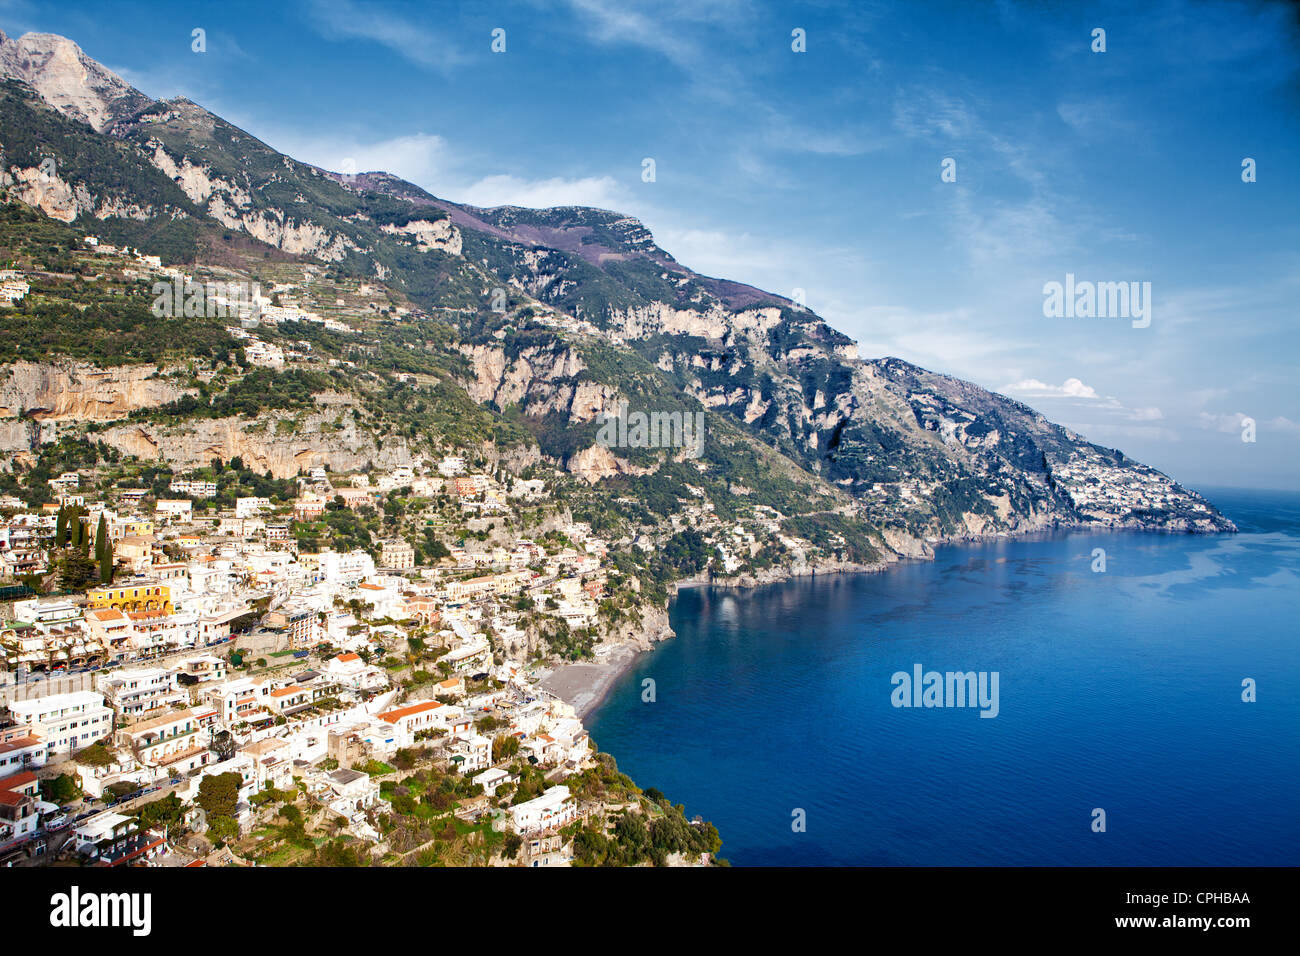 A view of the seaside town of Positano that is built into the mountainside on the Amalfi Coast in Italy Stock Photo